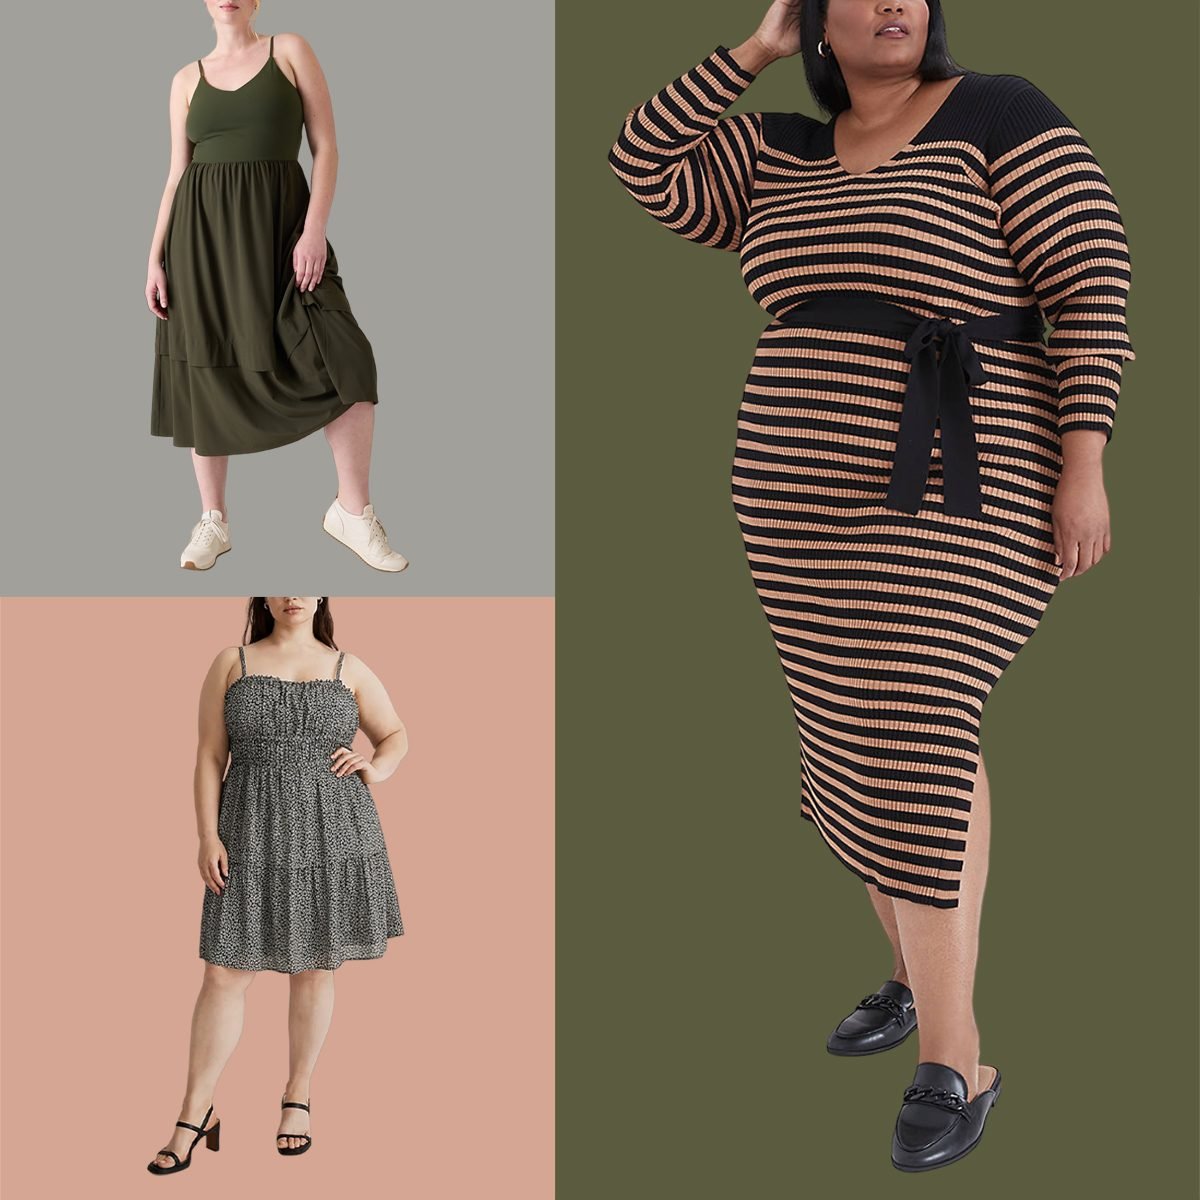 Summer One Piece Dress For Women Loose Fit, Striped Midi Plus Size